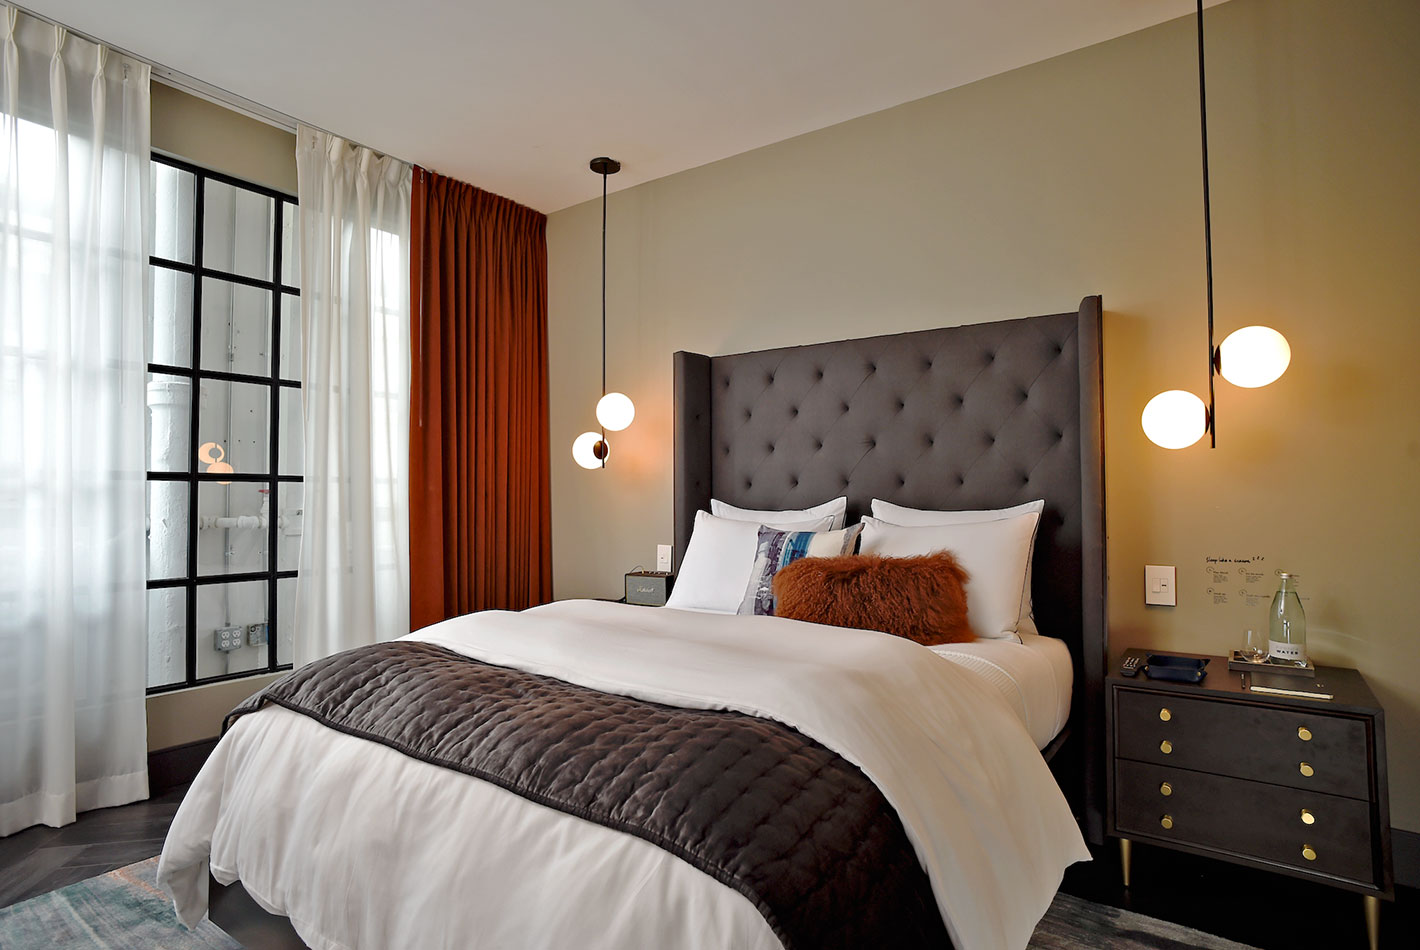 A grey queen-sized sleigh-bed in a West Elm Hotel model room with terra cotta colored curtains.